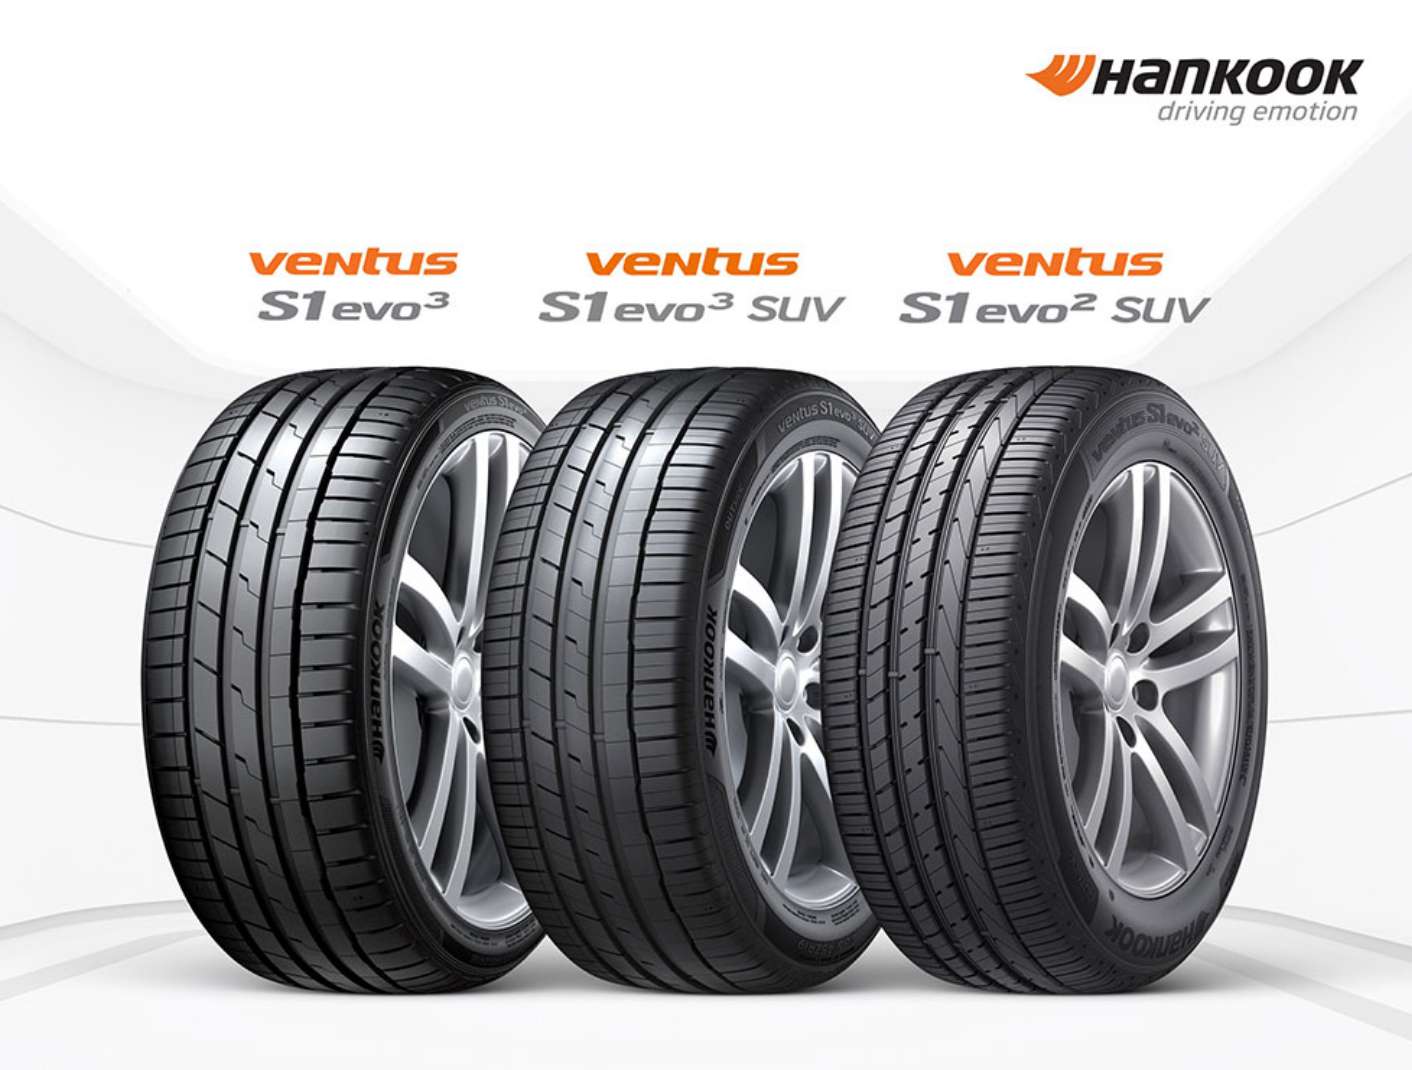 Hankook Ventus original equipment tires fitted on the VW Golf GTI, Golf R and Tiguan R models